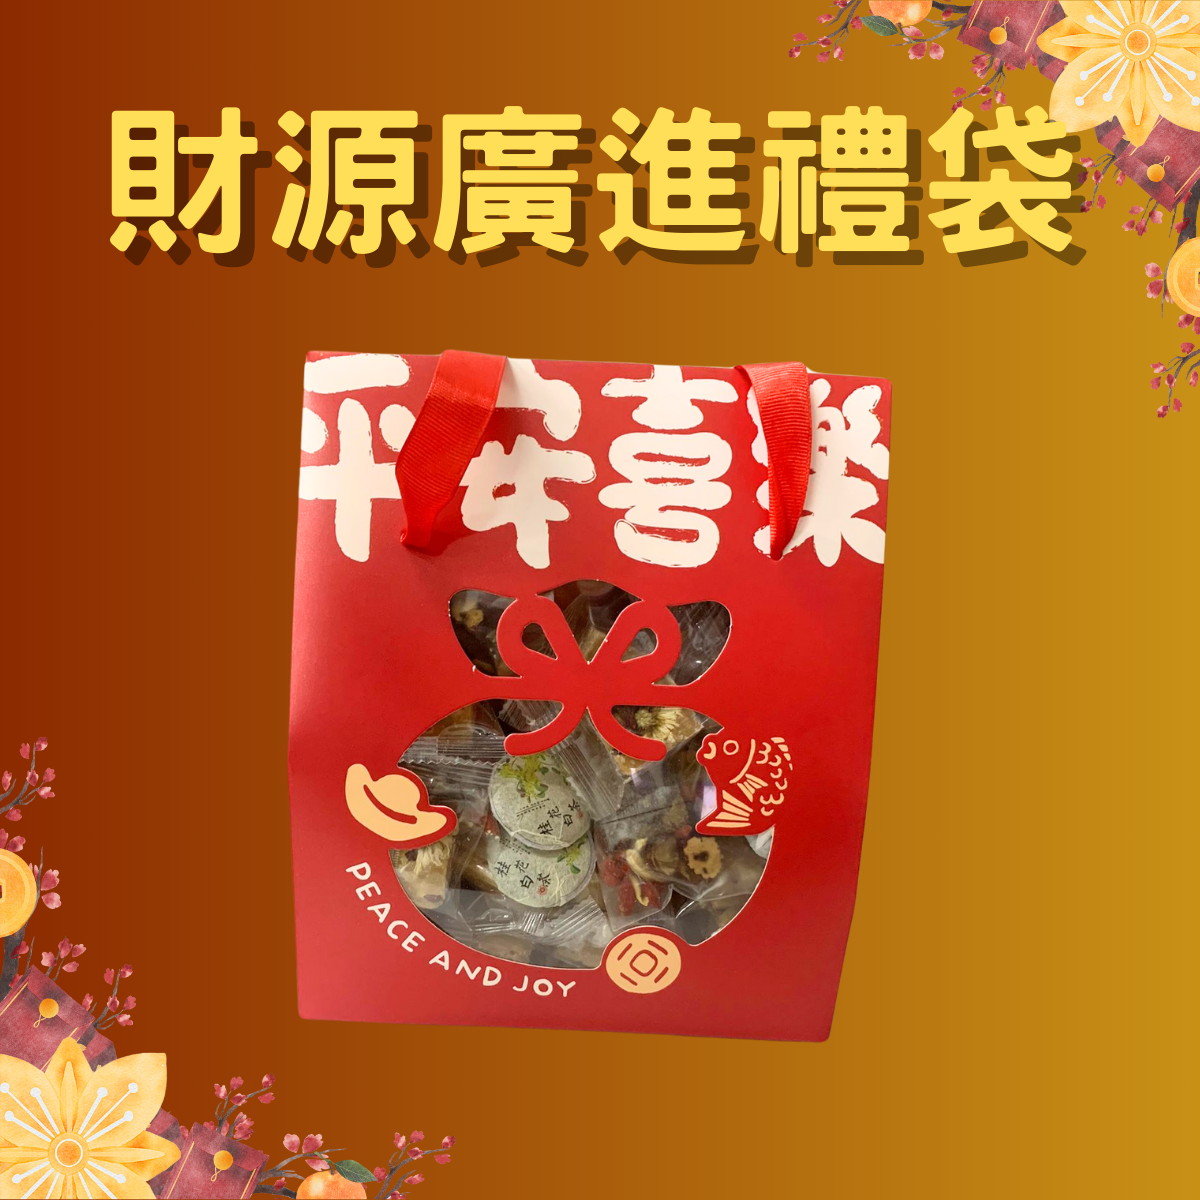 CNY Gift Set Box [A2] Prosperous financial resources, assorted gift box｜ 